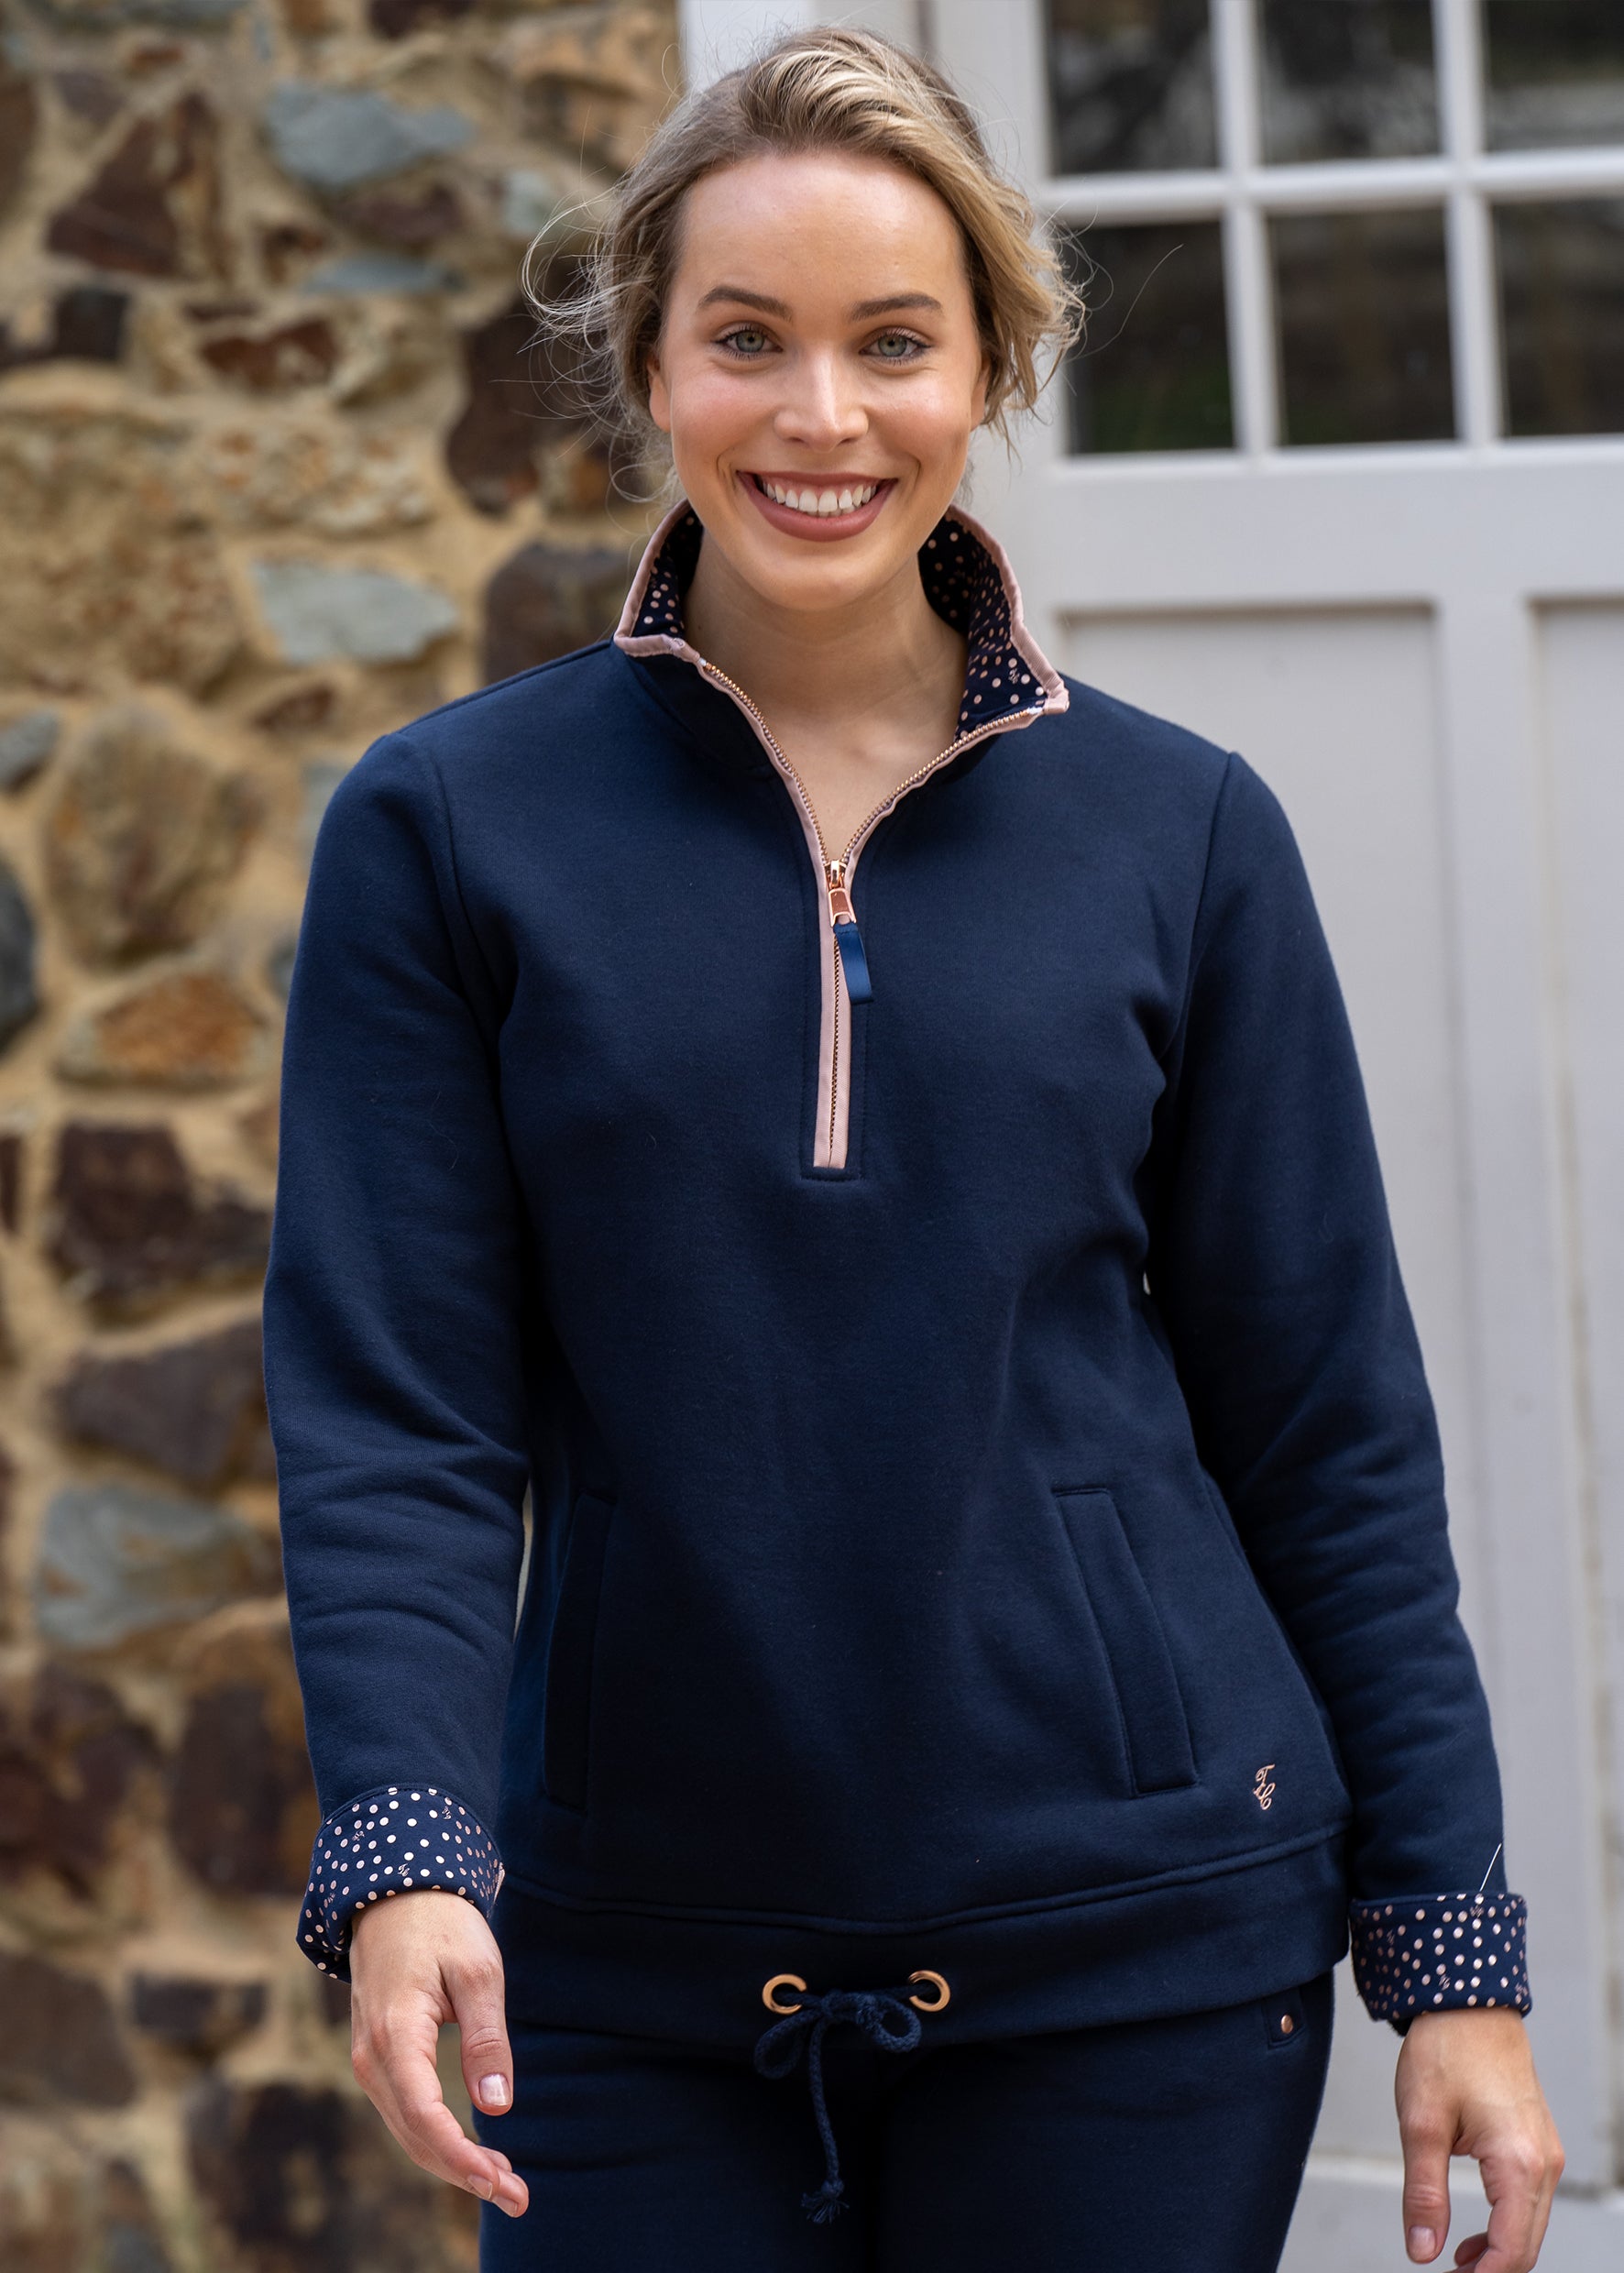 THOMAS COOK CLASSIC QUARTER ZIP RUGBY NAVY